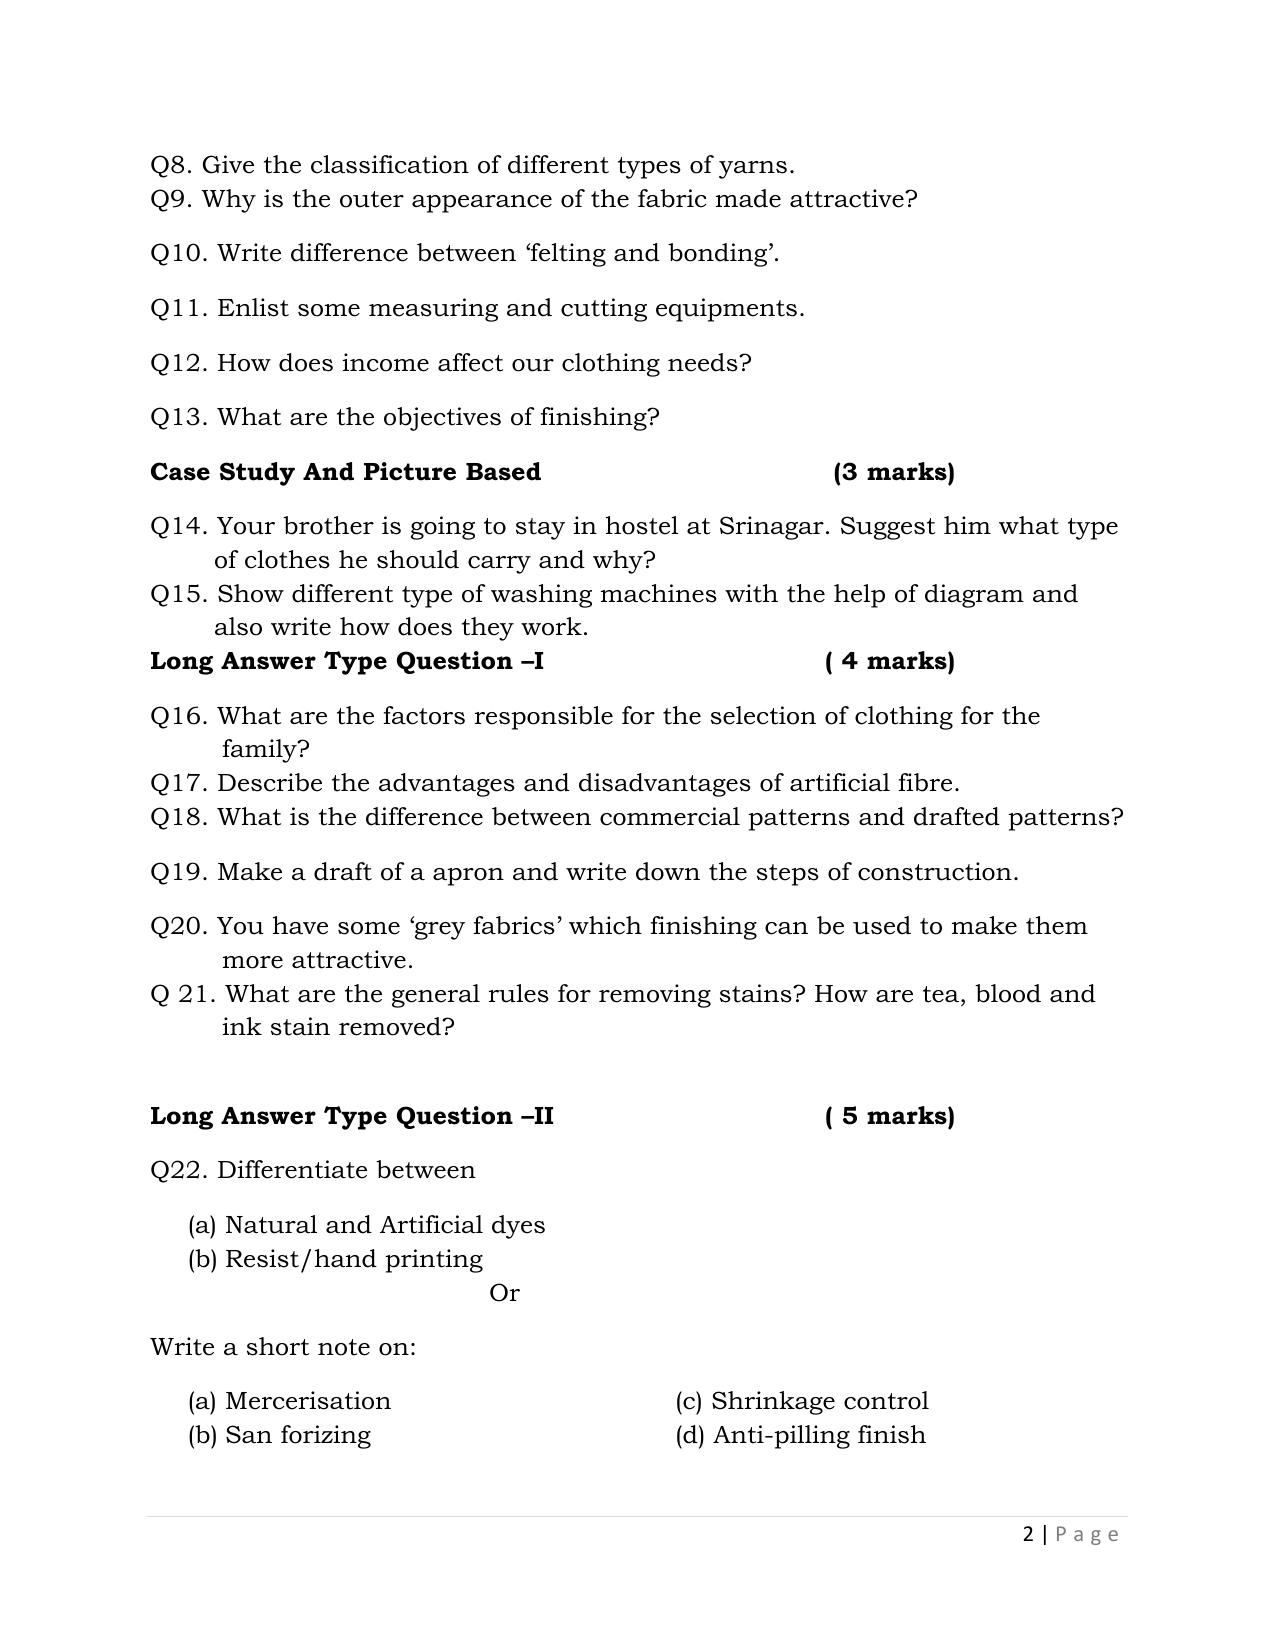 JKBOSE Class 12 Clothing for Family Model Question Paper - Page 2